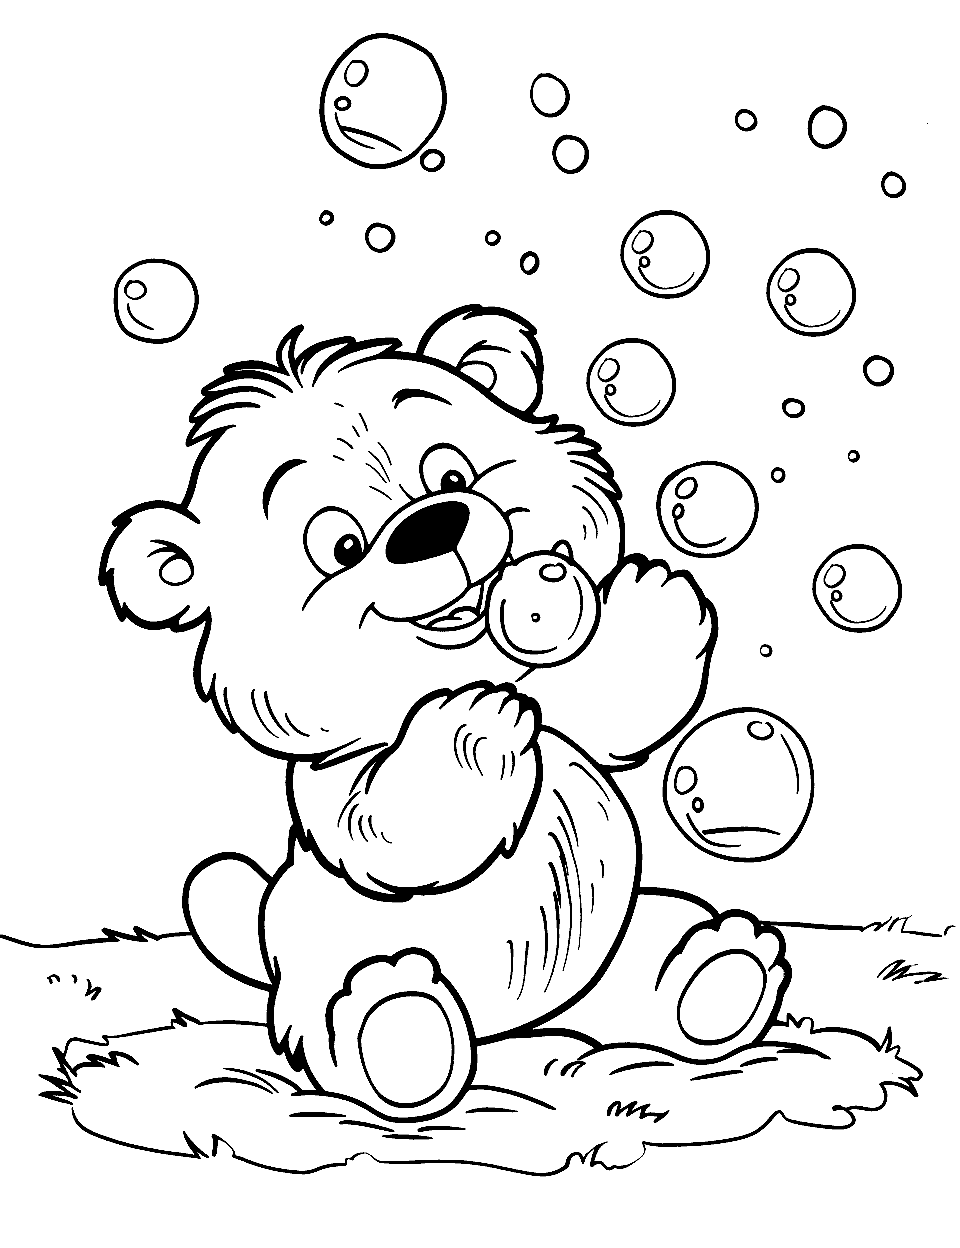 Playful Teddy Bear with Bubbles Coloring Page - A teddy bear blowing and chasing soap bubbles.